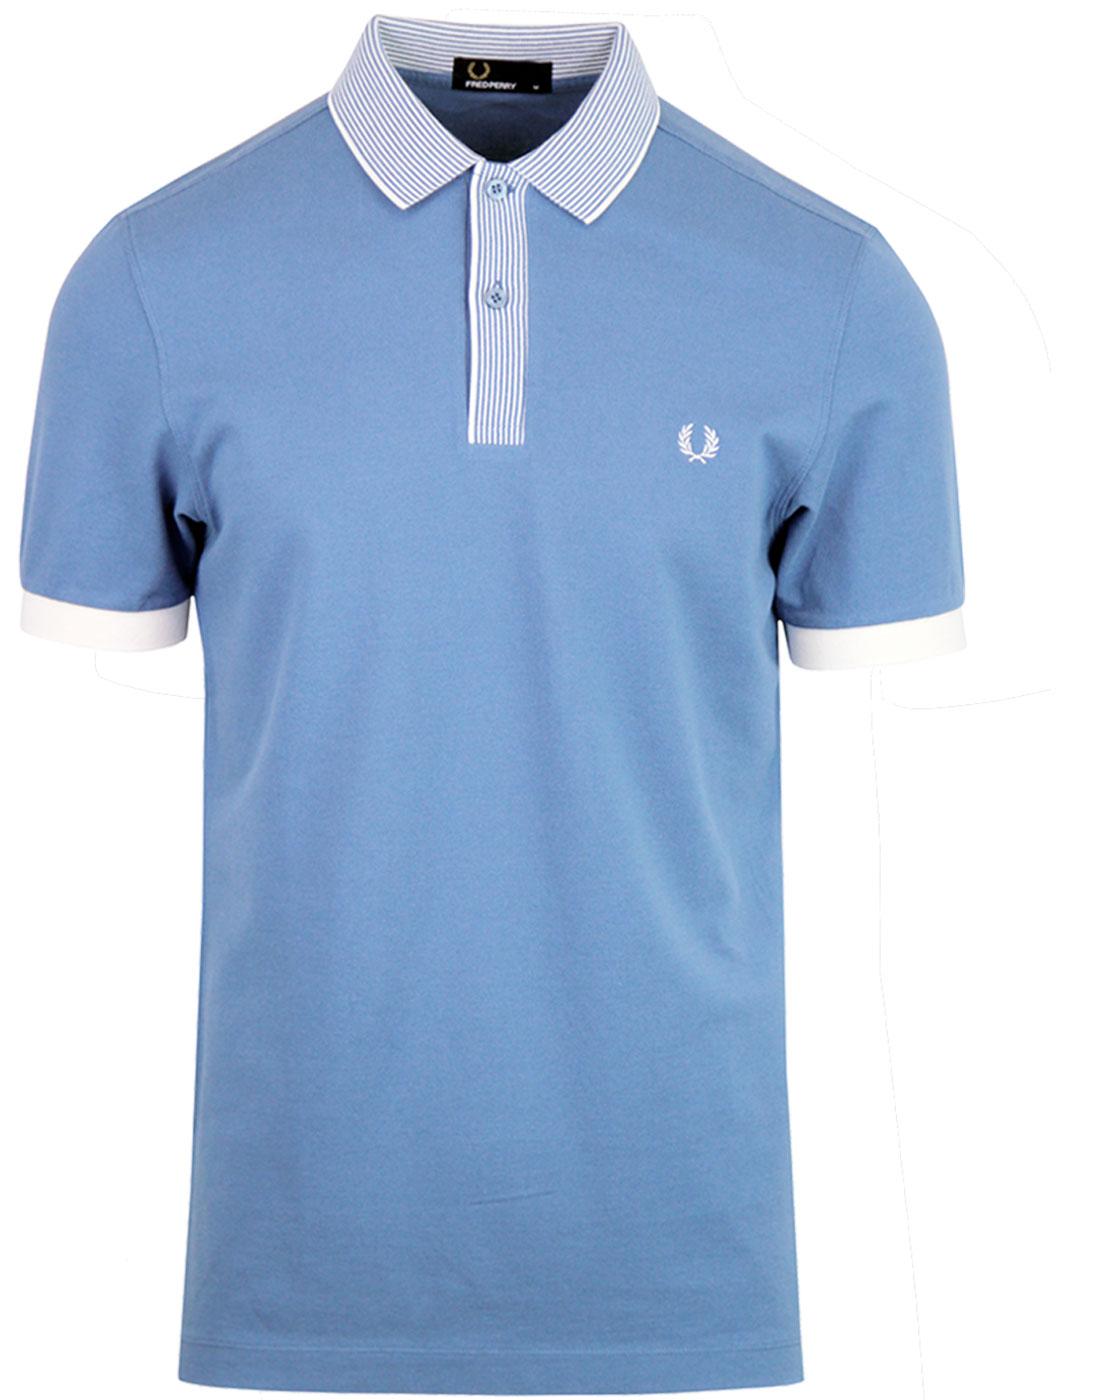 FRED PERRY Men's Stripe Trim Pique Polo Shirt Washed Dusk